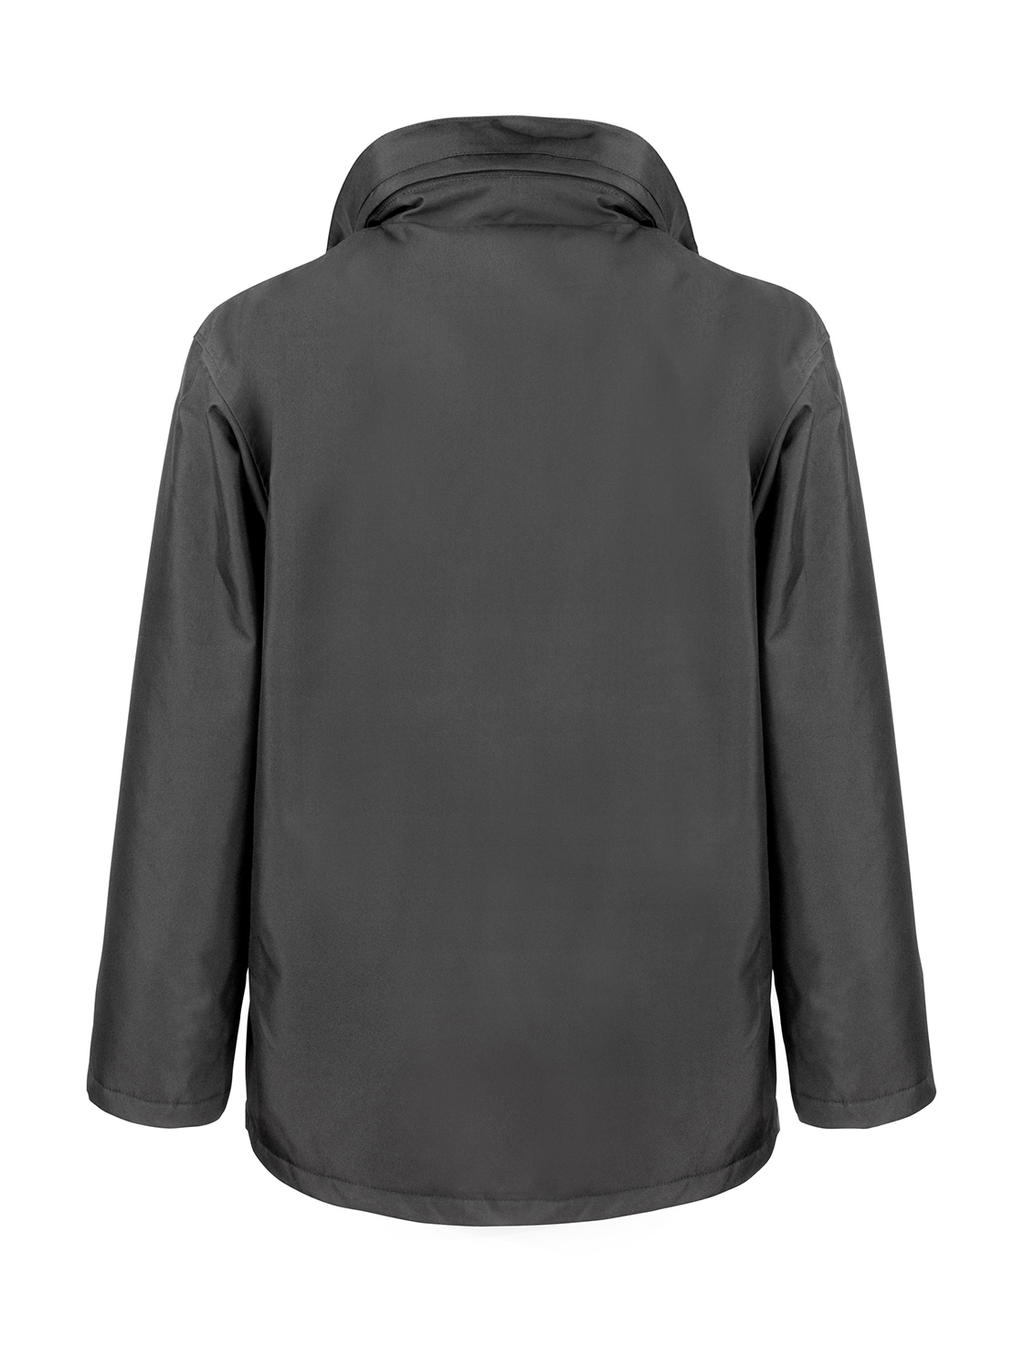  Platinum Managers Jacket in Farbe Black